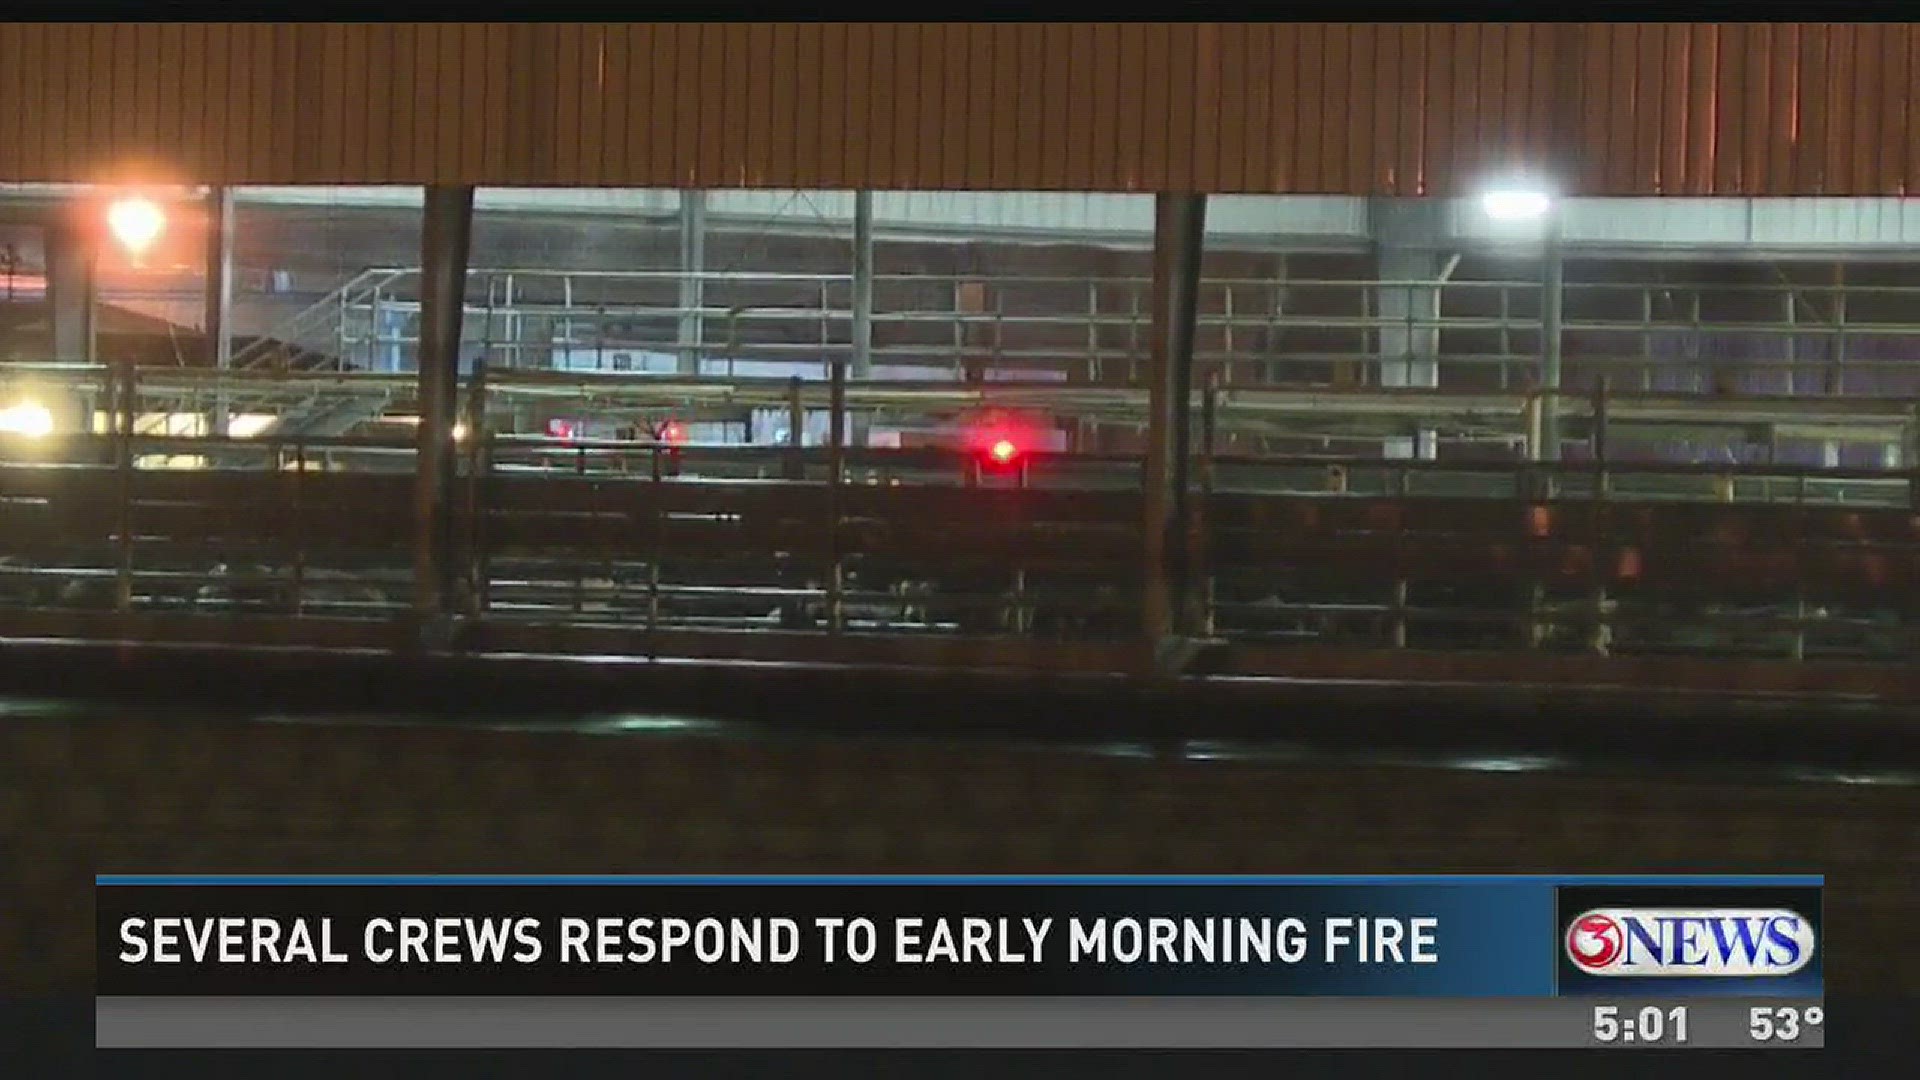 A fire broke out early this morning at the Sam Kane's beef processing plant.